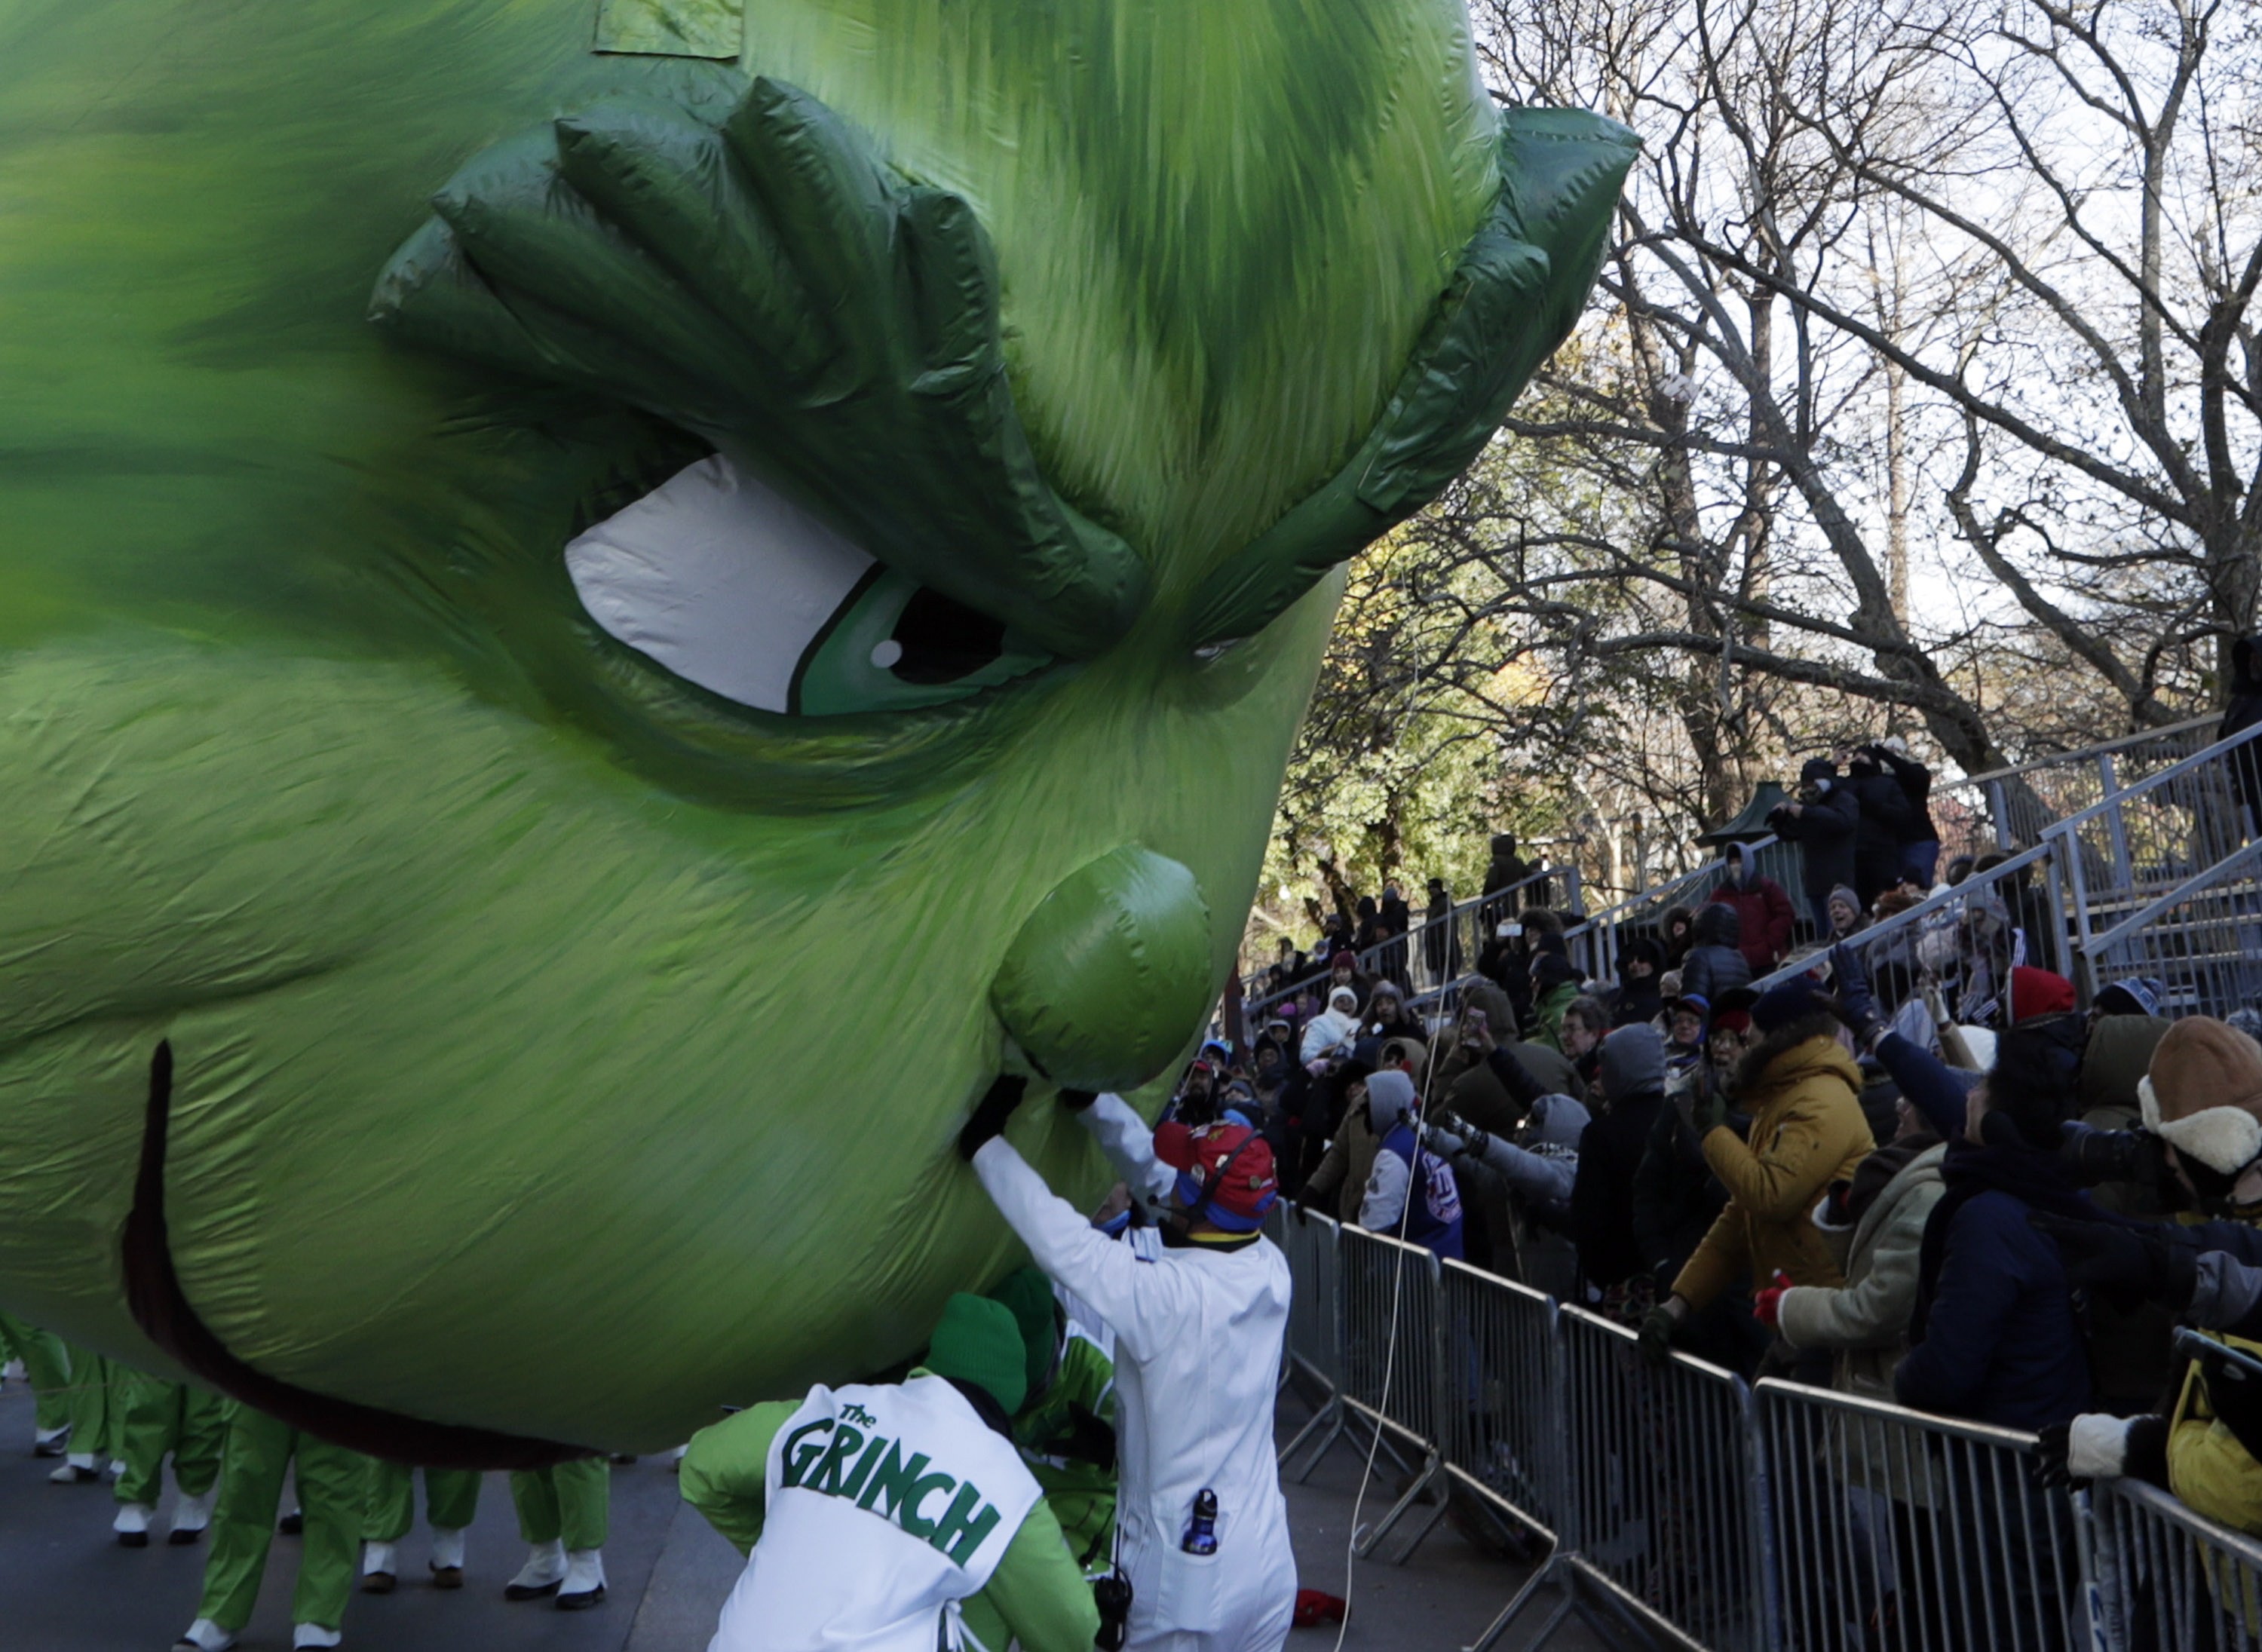 Balloon technicians try and hold back the Grinch balloon from crashing down onto the street and into the crowd as it floats down Central Park West in New York during the Macy's Thanksgiving Day Parade. Photo: EPA